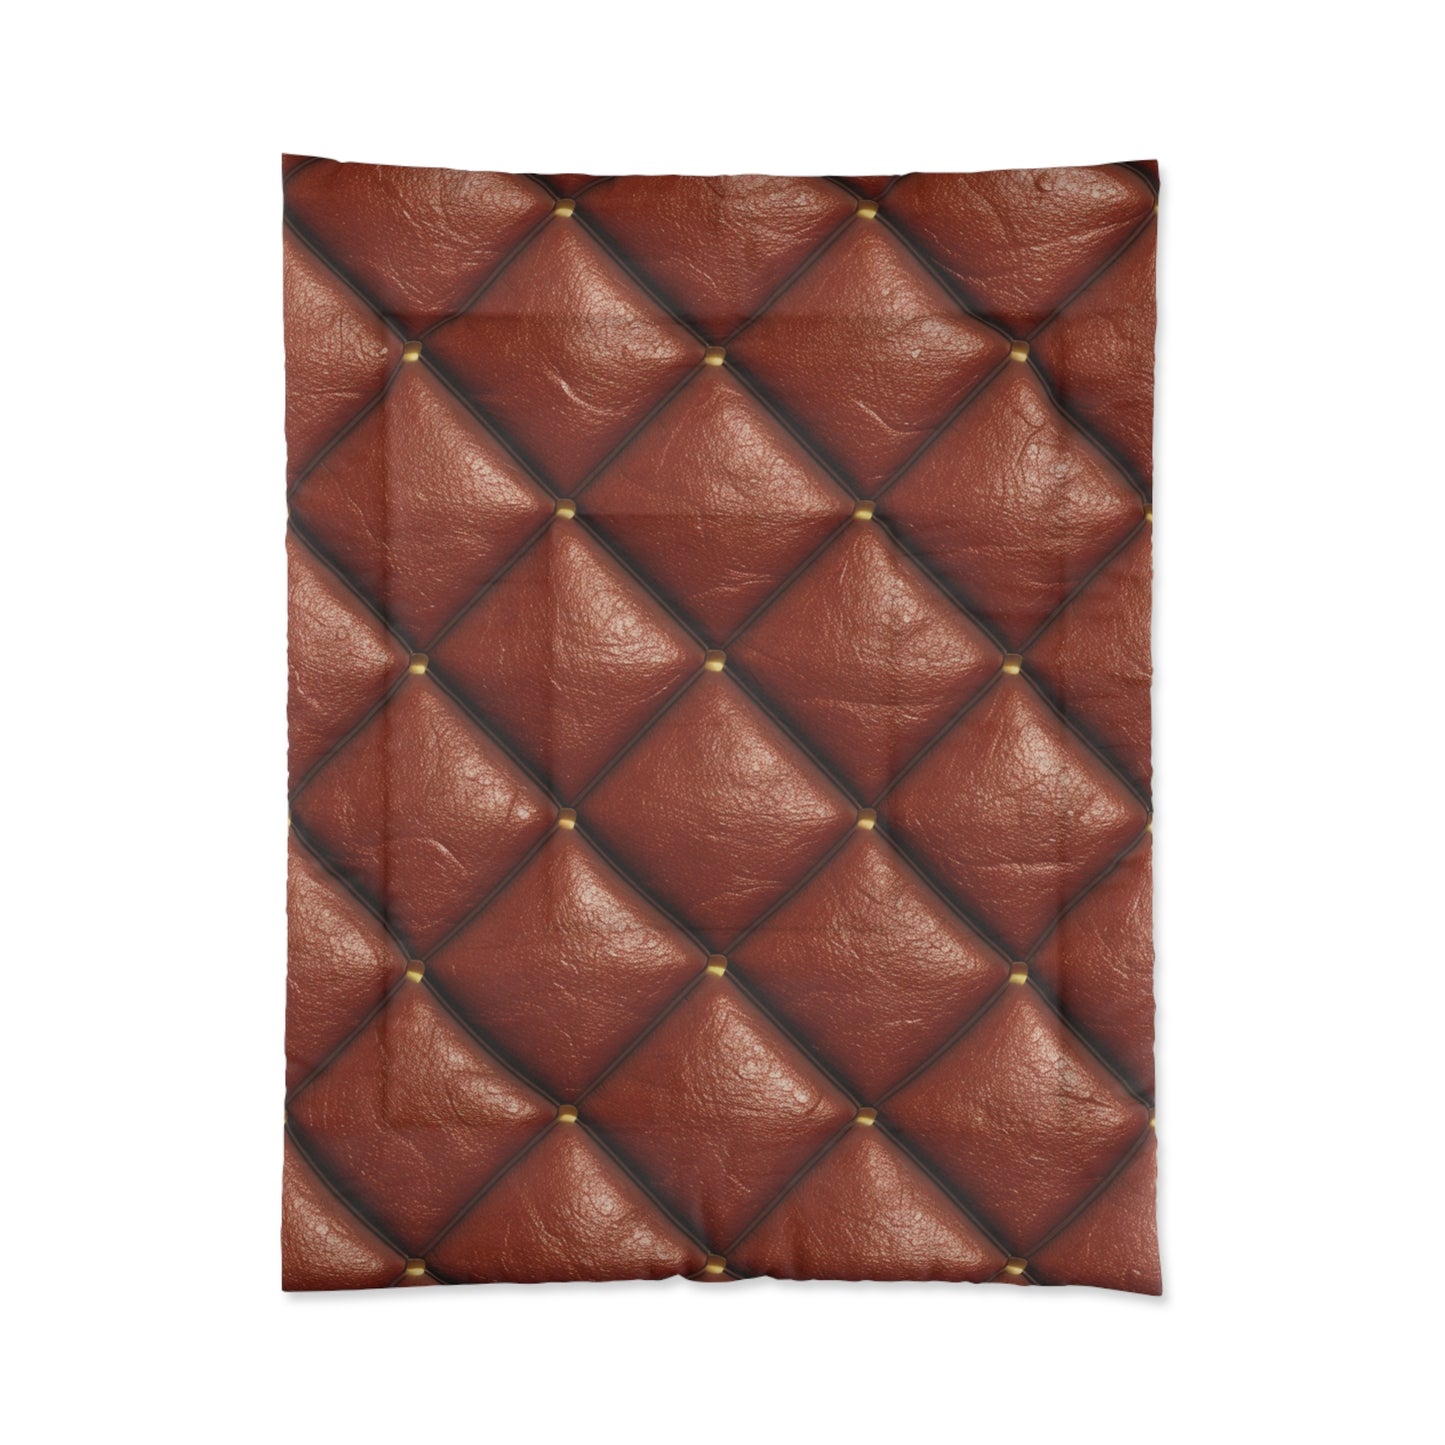 Brown Leather Cognac Pattern Rugged Durable Design Style - Bed Comforter